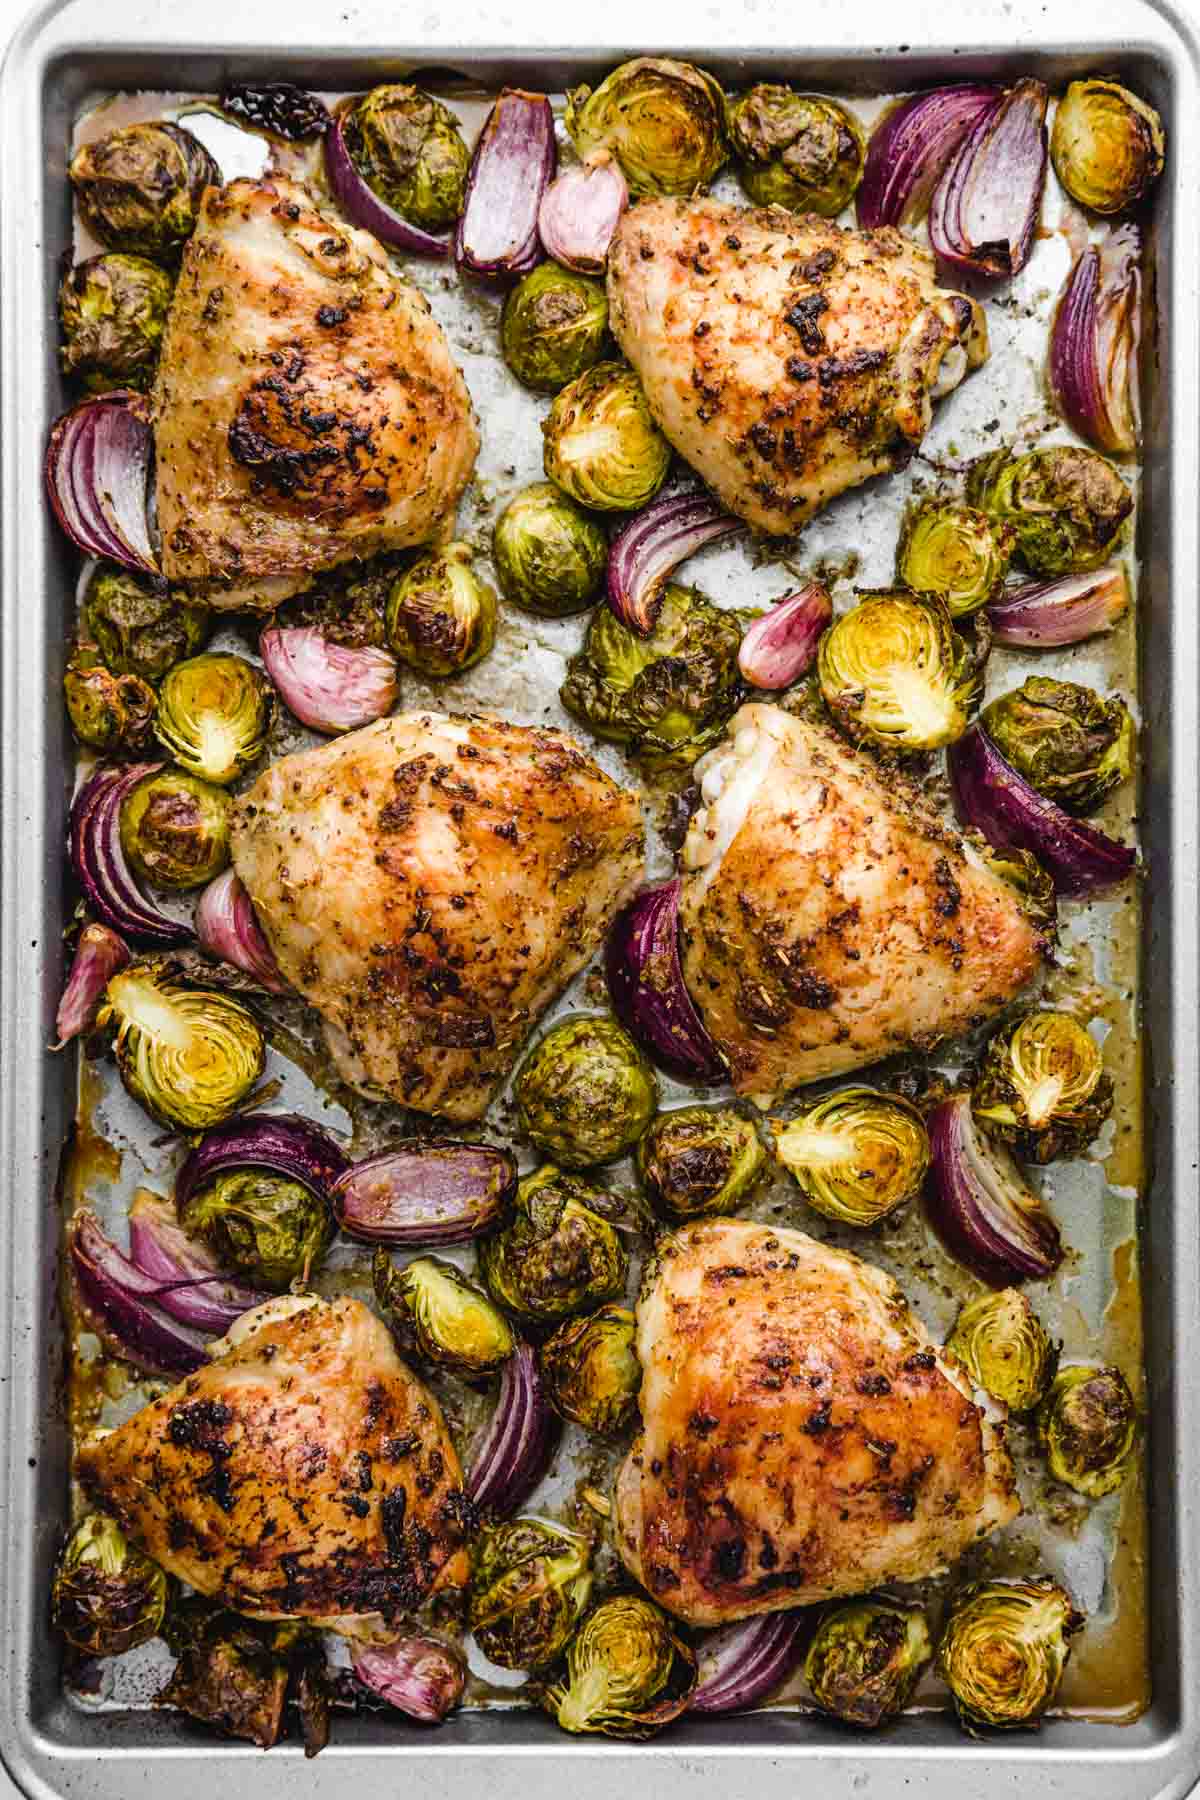 Roasted chicken and brussels sprouts on a sheet pan